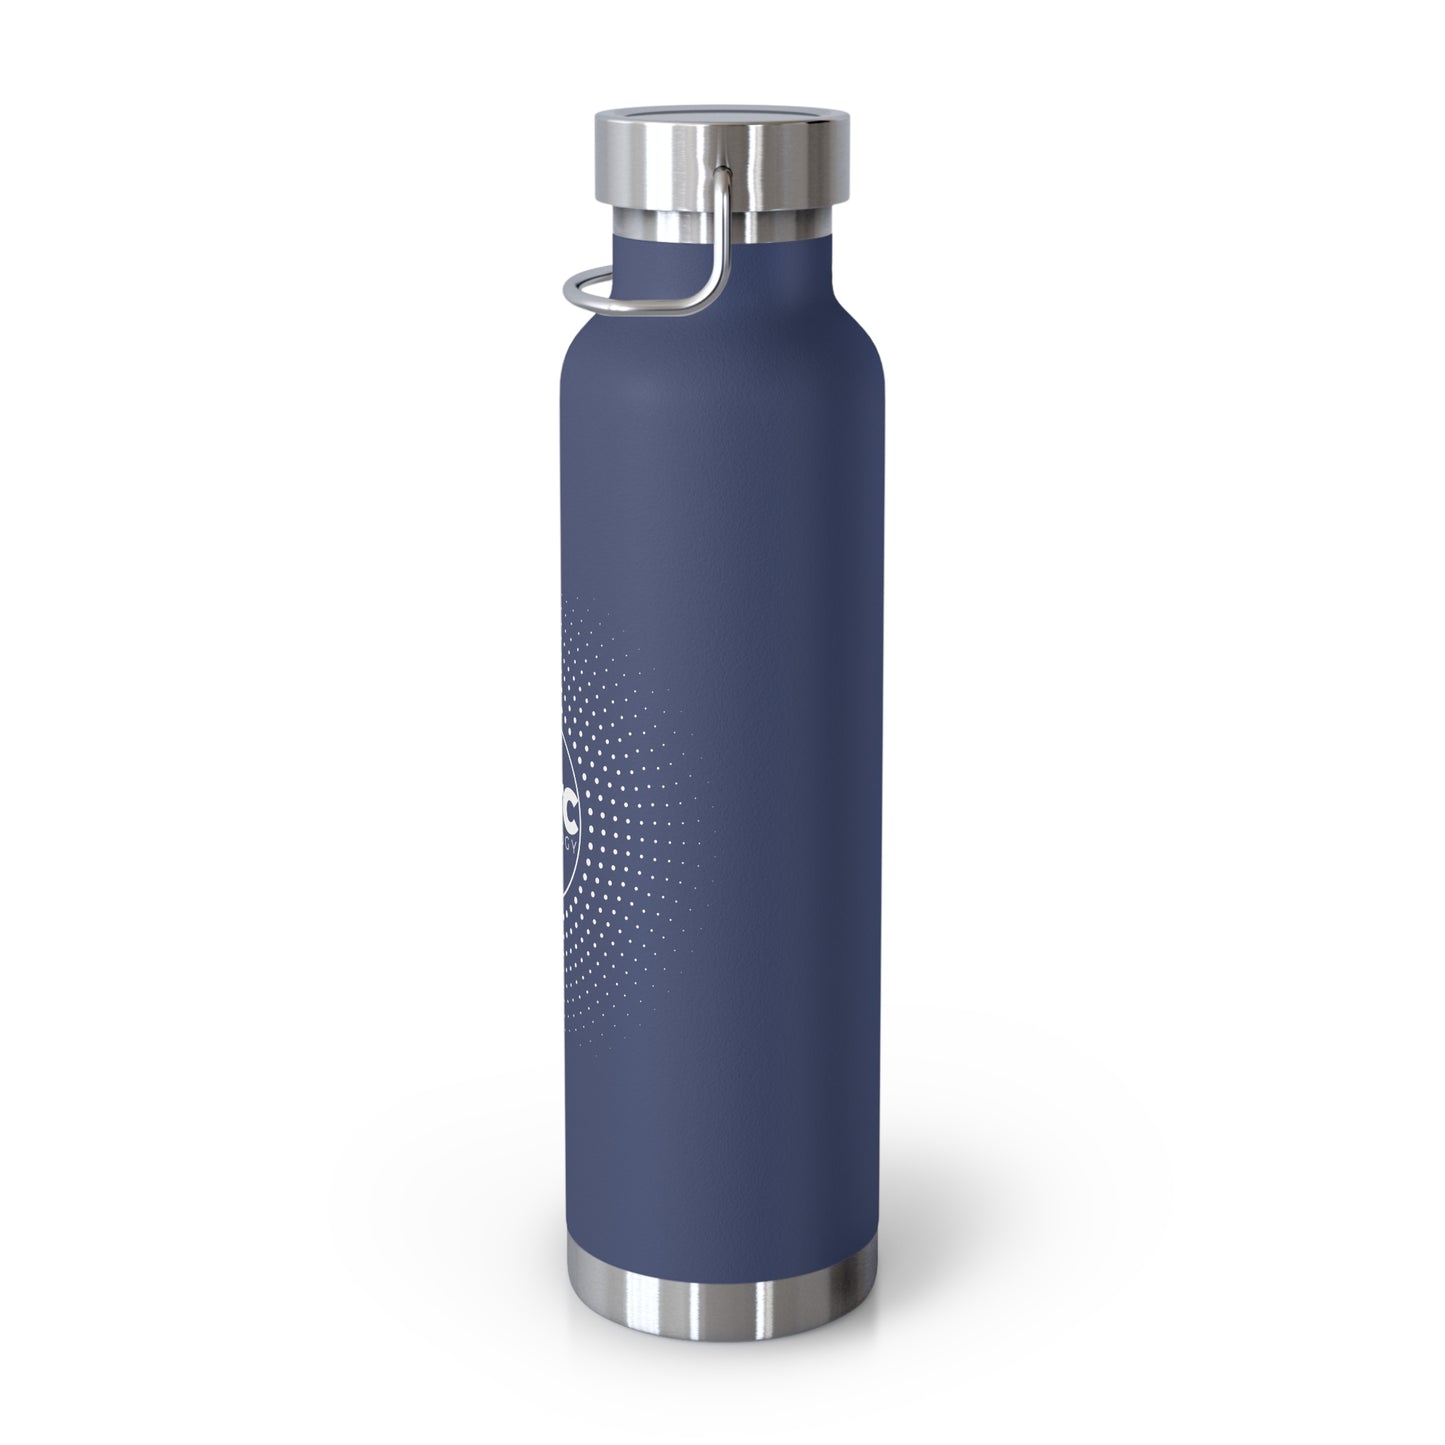 WTC Insulated Bottle